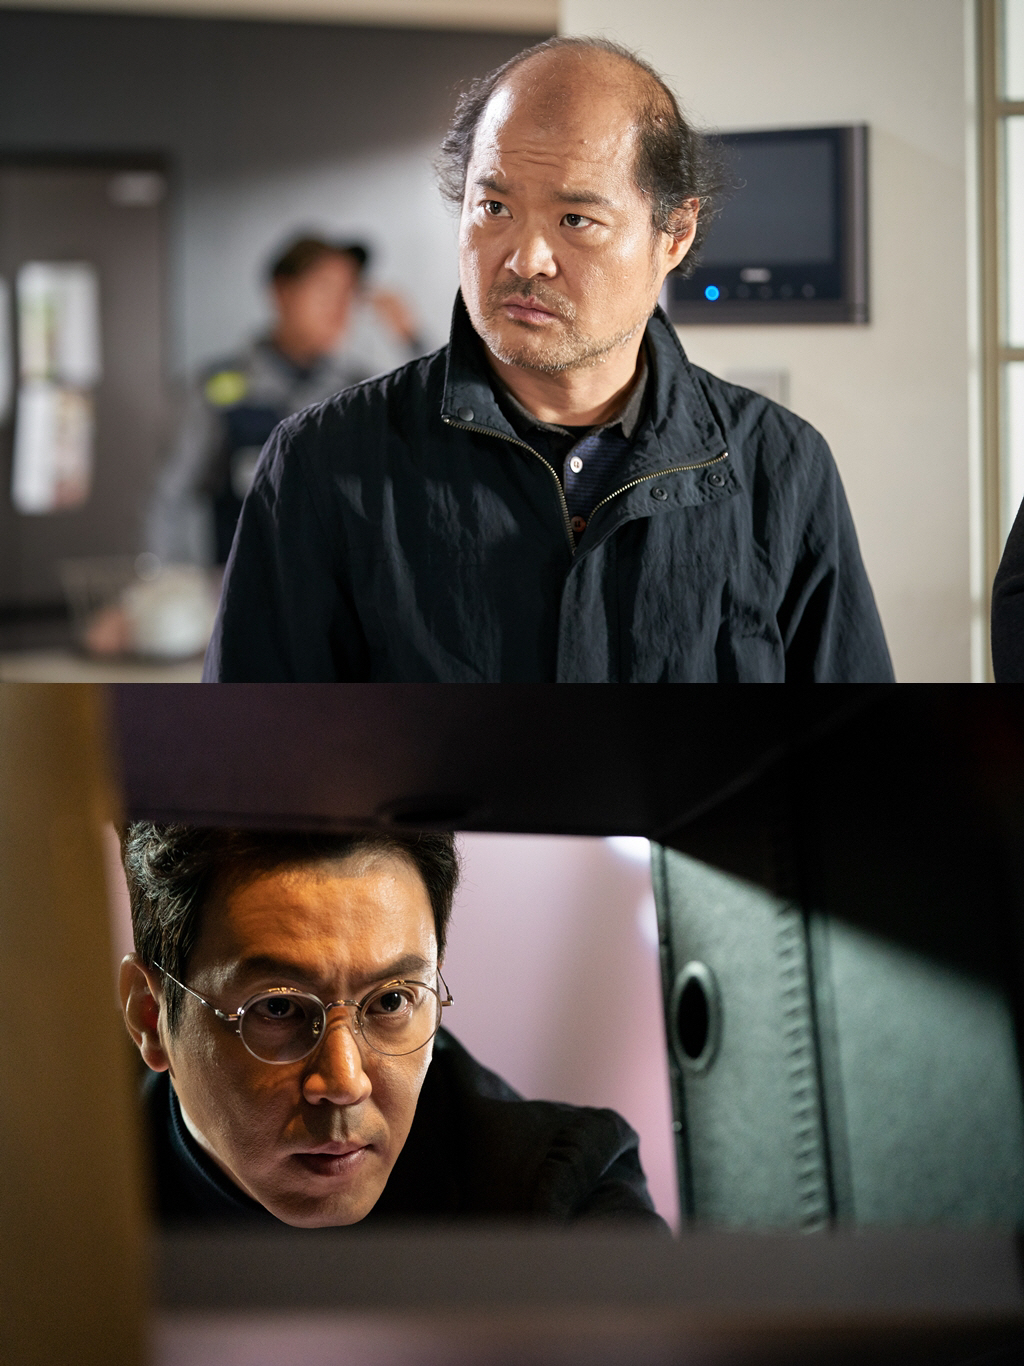 Alice Kim Sang-ho, Choi Won-young Two Luxury Actors are expected to spark an Acting thermoelectric.SBSs new gilt drama Alice (playplayed by Kim Gyu-One, Kang Cheol-gyu, and Kim Ga-young/directed by Baek Soo-chan/production studio S), which premieres Friday, August 28 at 10 p.m., is a human SF depicting a woman who resembles a dead mother, the magical Journey to the Center of Time of a man who lost his feelings.Alice is a human SF.It is a special genre that combines fantasy Urea, which started with the assumption that there are Journey to the Center of Time in this world where we live, and human Urea of the main characters who want to protect precious people.The two main characters, Kim Hee-sun (played by Yoon Tae-yi/Park Sun-young) and One (played by Park Jin-gyeom), draw this with their powerful presence and deep acting ability.LuxuryActors, whose credibility soars even if they hear their names here, add strength: Kim Sang-ho (the Ko Hyeong-seok station) and Choi Won-young (the one station).Kim Sang-ho plays the role of Ko Hyung-seok, the head of the Detective 2 team at the Seoul Southern Police Station, and Ko Hyung-seok has a special relationship with high school student Park Jin-gum in 2010.Since then, Park Jin-gum has saved his life and protects him like a family member who lost his mother. As of 2020, Ko Hyung-seok is like Park Jin-gums unconditional friendly.Detectives sharp point, charisma, and judgment, as well as the human aspect of Park Jin-gums heart.Kim Sang-ho is a believe and see actor who boasts a powerful acting ability across the screen and across the screen.Kim Sang-ho shows his unique friendly and warm appearance from the heavy charisma in this Alice.Kim Sang-ho, who makes viewers move into the drama, is expected to play.Actor Choi Won-young, like a pale-colored group, also predicted a special performance in Alice.Choi Won-young is a scientist who believes in God in the play, a doctor of physics in Korea with a genius brain, and a man who loves God.Seo One is a person who holds a meaningful key in the Alice story, which is based on Journey to the Center of Time.Especially, it is a character of high difficulty to express both the opposite Urea of science and god which have no error.Choi Won-young makes it perfectly his own, no matter what work, any character he meets; his ability to act is wide and deep.It also digests a variety of characters that can not be believed that the same Actor has been Acting.So the one character who has to draw the opposite Urea is a production team saying that it is possible to be Choi Won-young.Kim Hee-sun and One of the states also joined Kim Sang-ho and Choi Won-young, who were never worthy of the modifier Luxury.Just because you can appreciate their breathtaking acting thermoelectric, you should see Alice.Meanwhile, SBSs new gilt drama Alice, the most anticipated movie in the second half of 2020, will be broadcasted at 10 pm on Friday, August 28th.